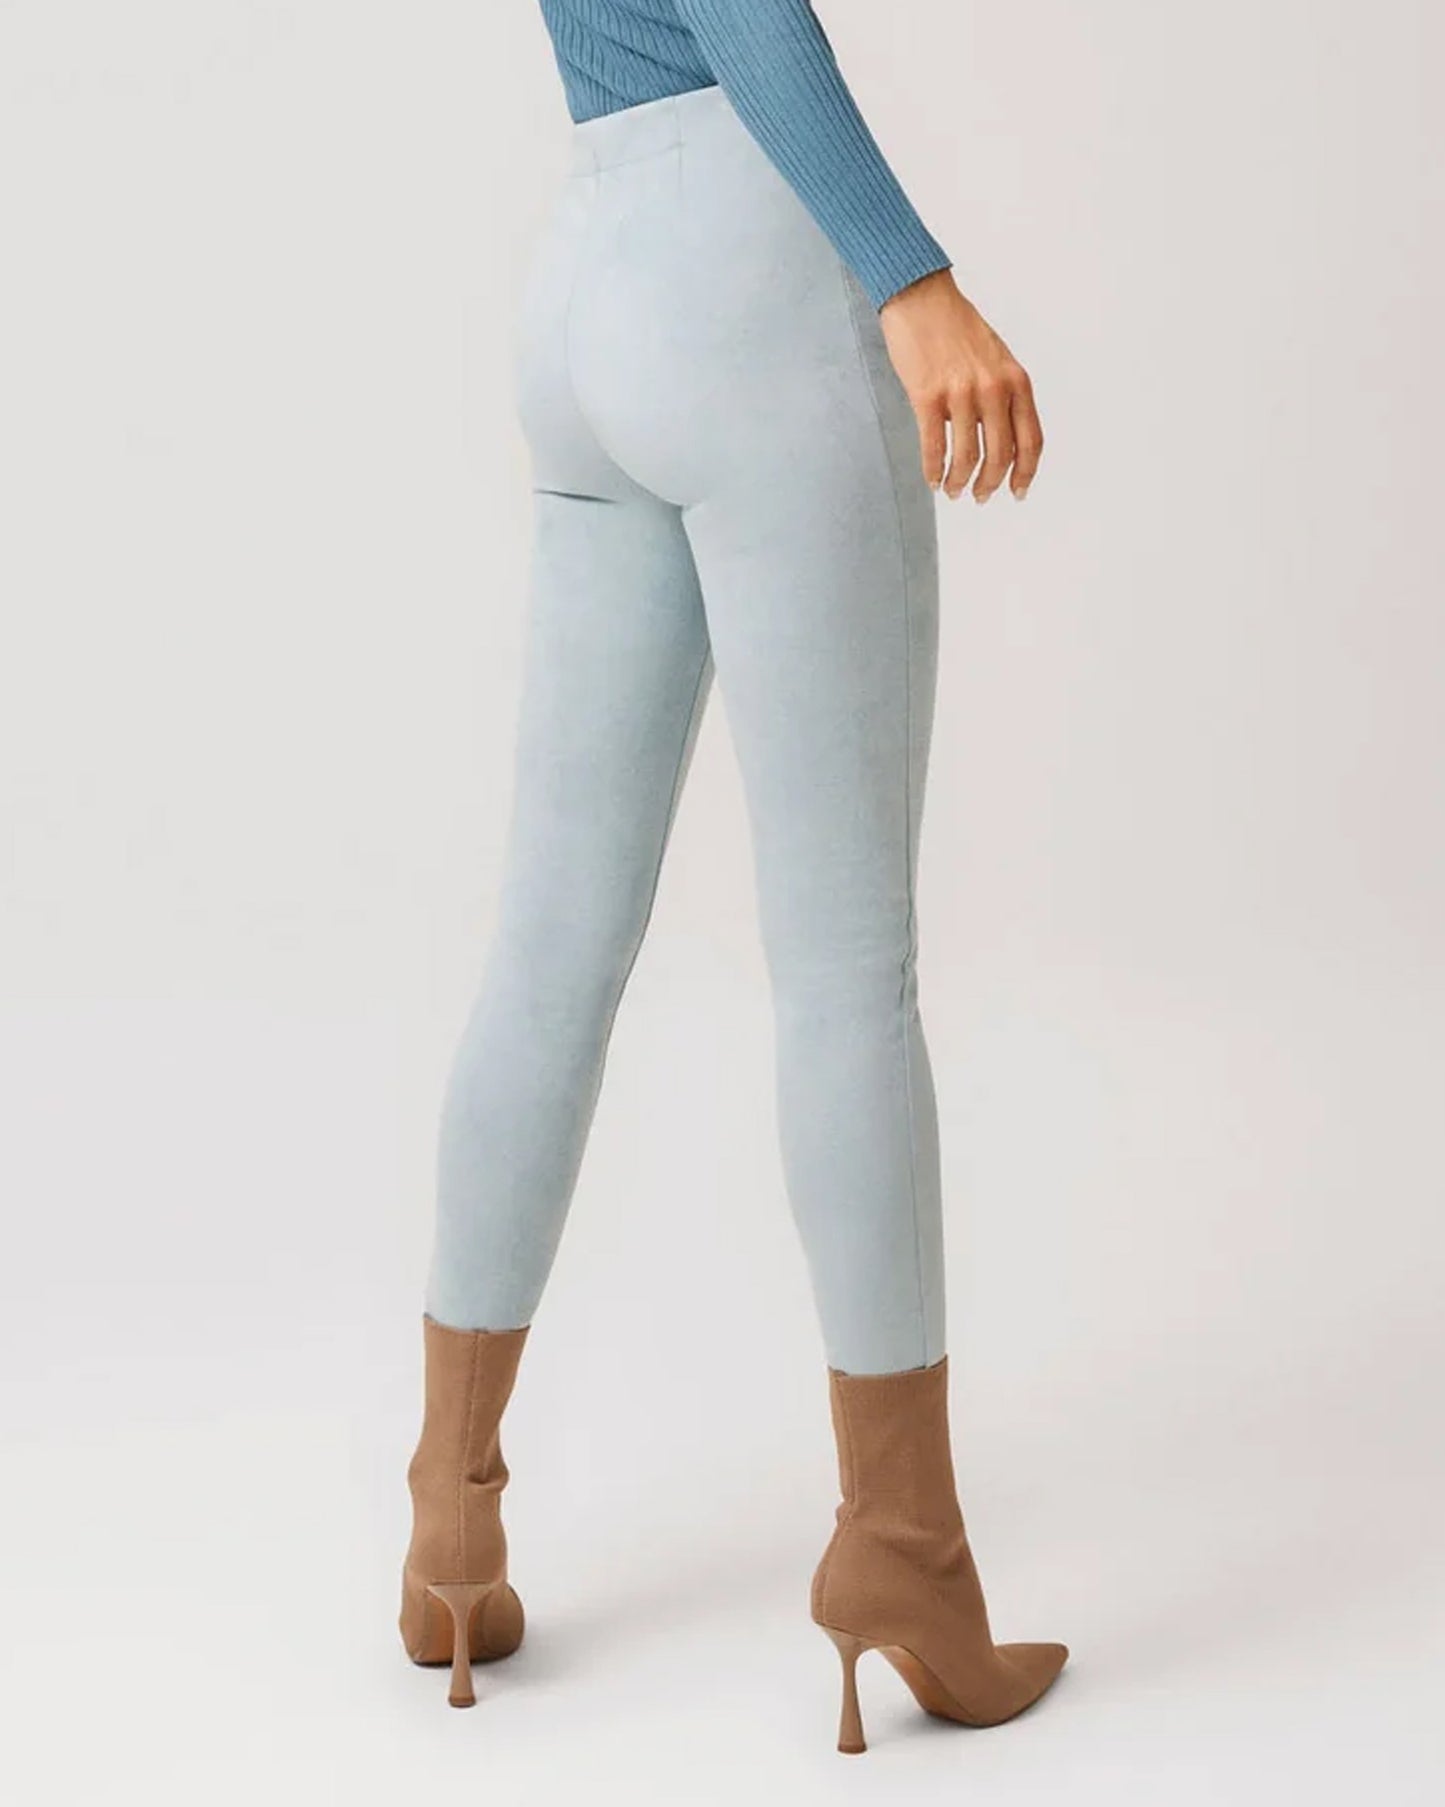 Ysabel Mora 70297 Faux Suede Leggings - Light pastel blue plush velour suede effect high waisted trouser leggings, worn with tan heeled ankle boots.